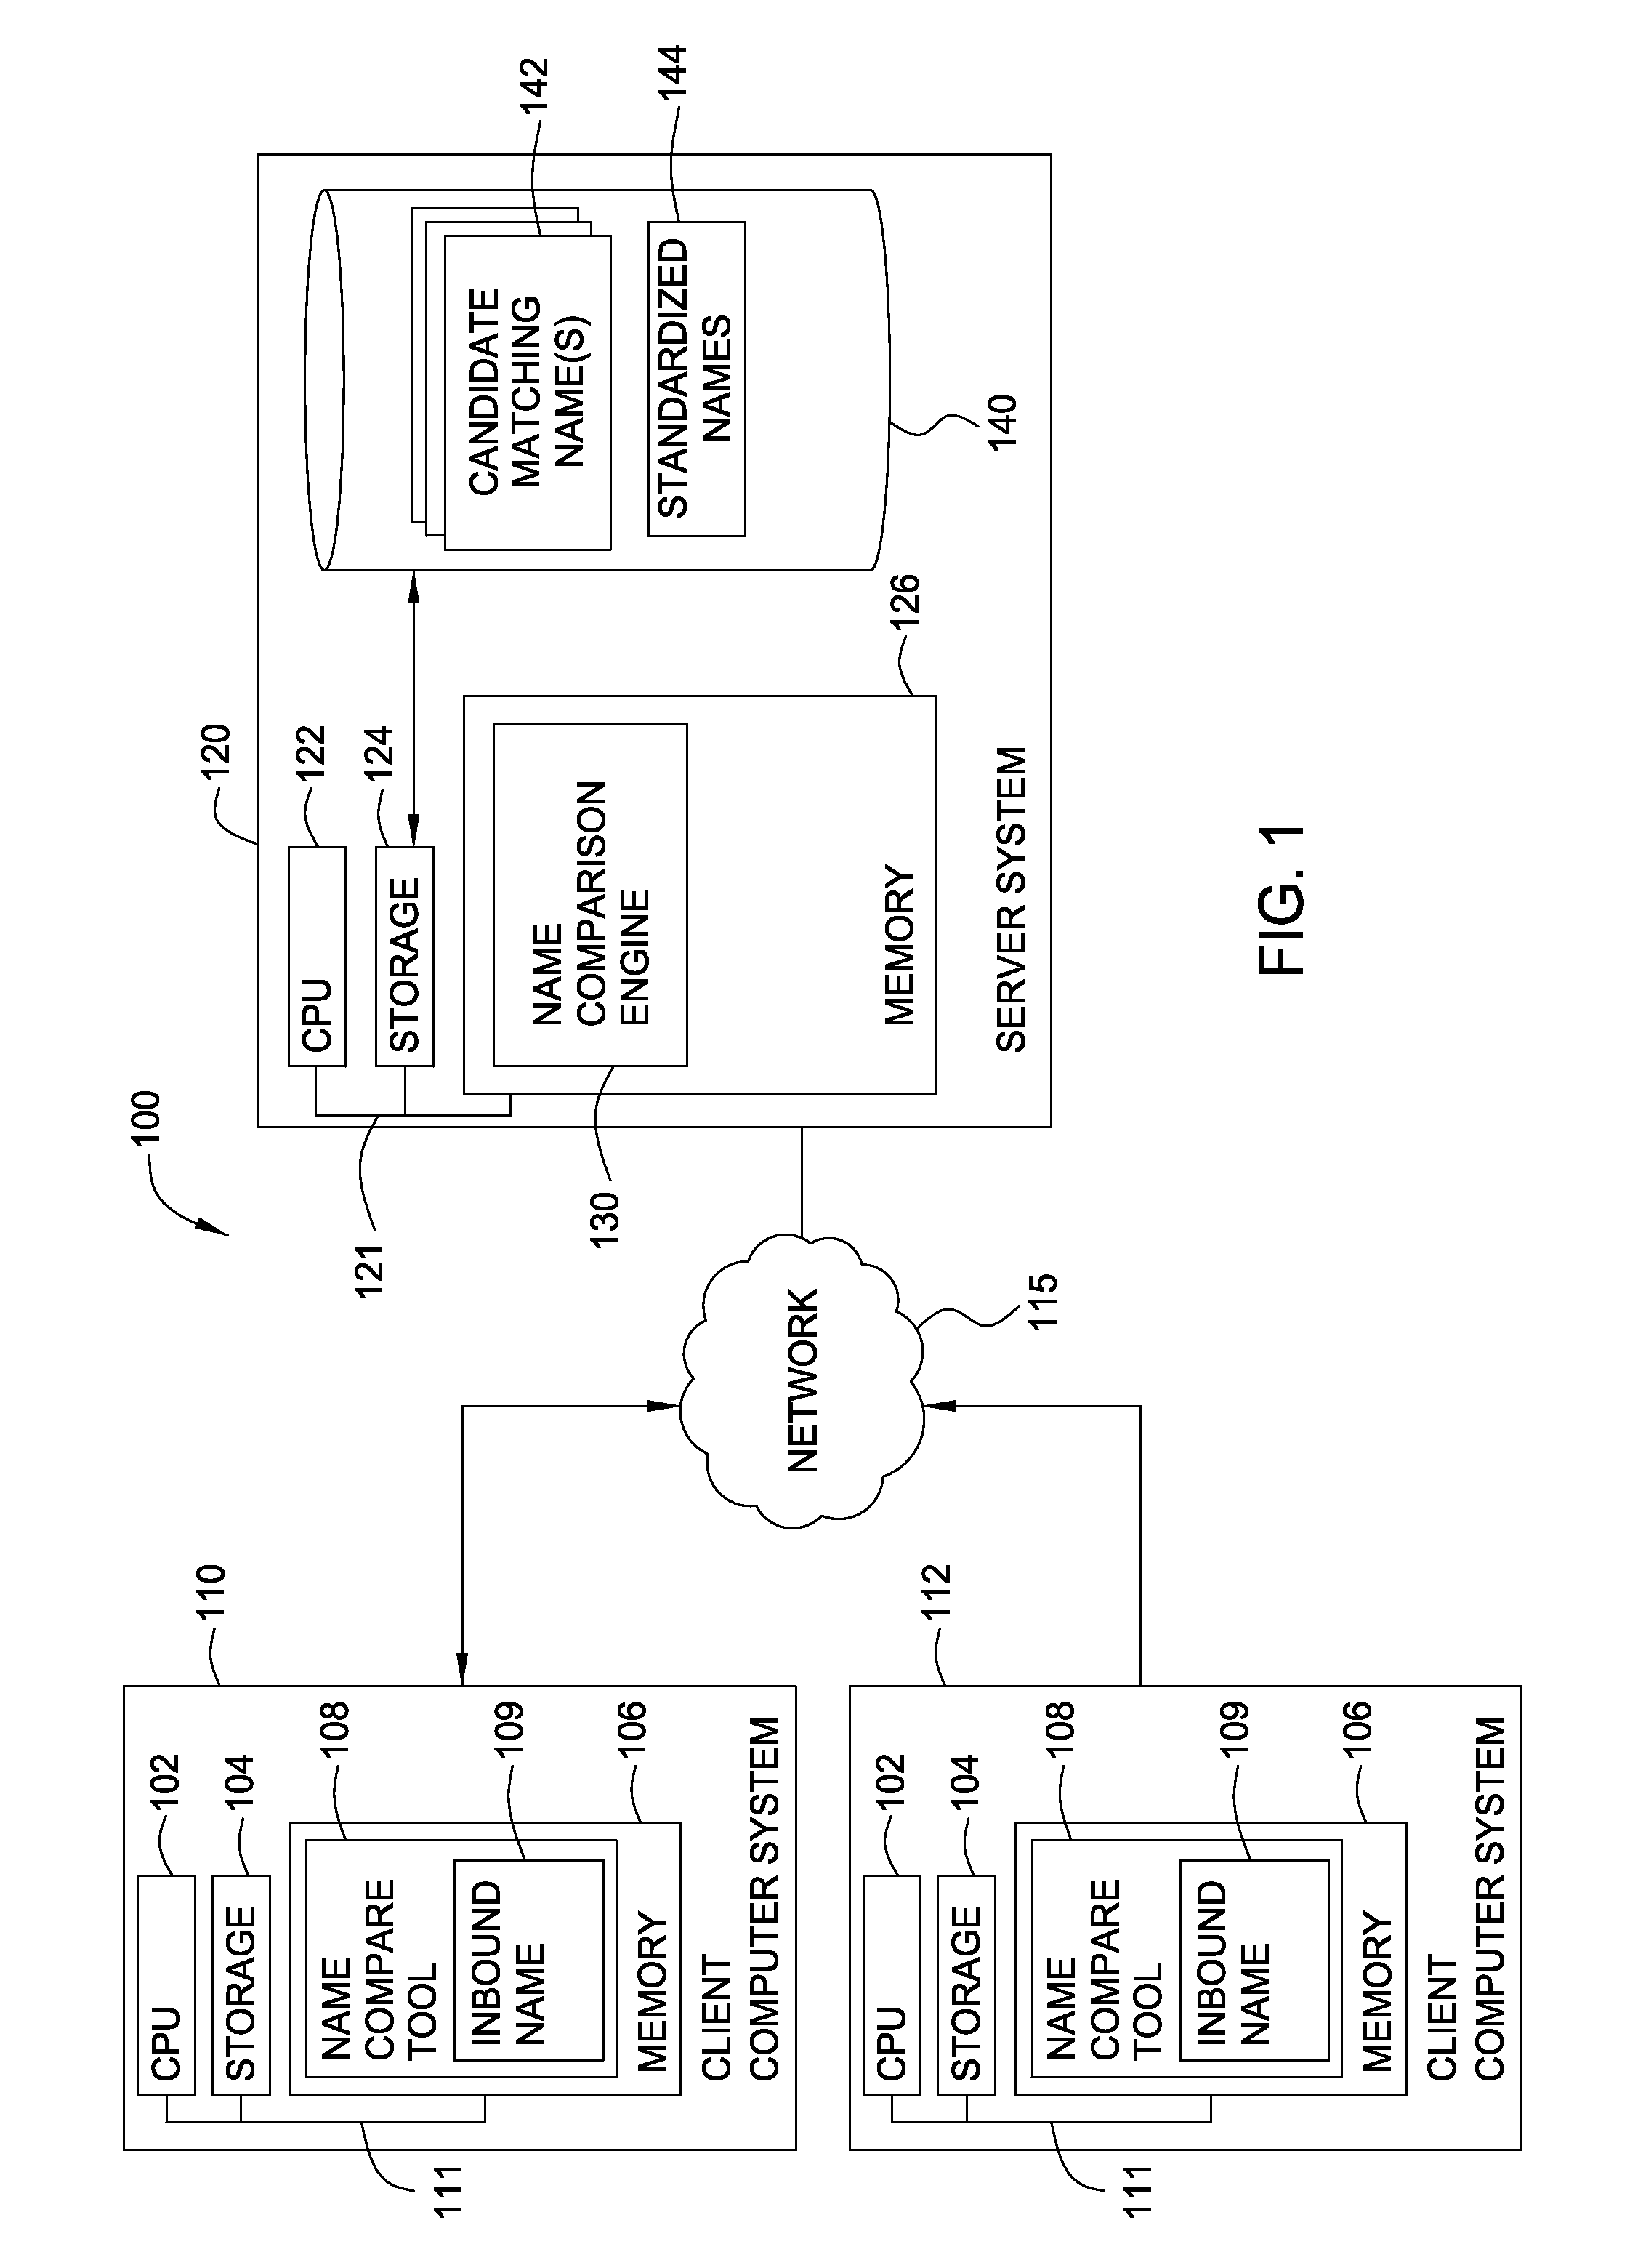 Method, apparatus and article for assigning a similarity measure to names